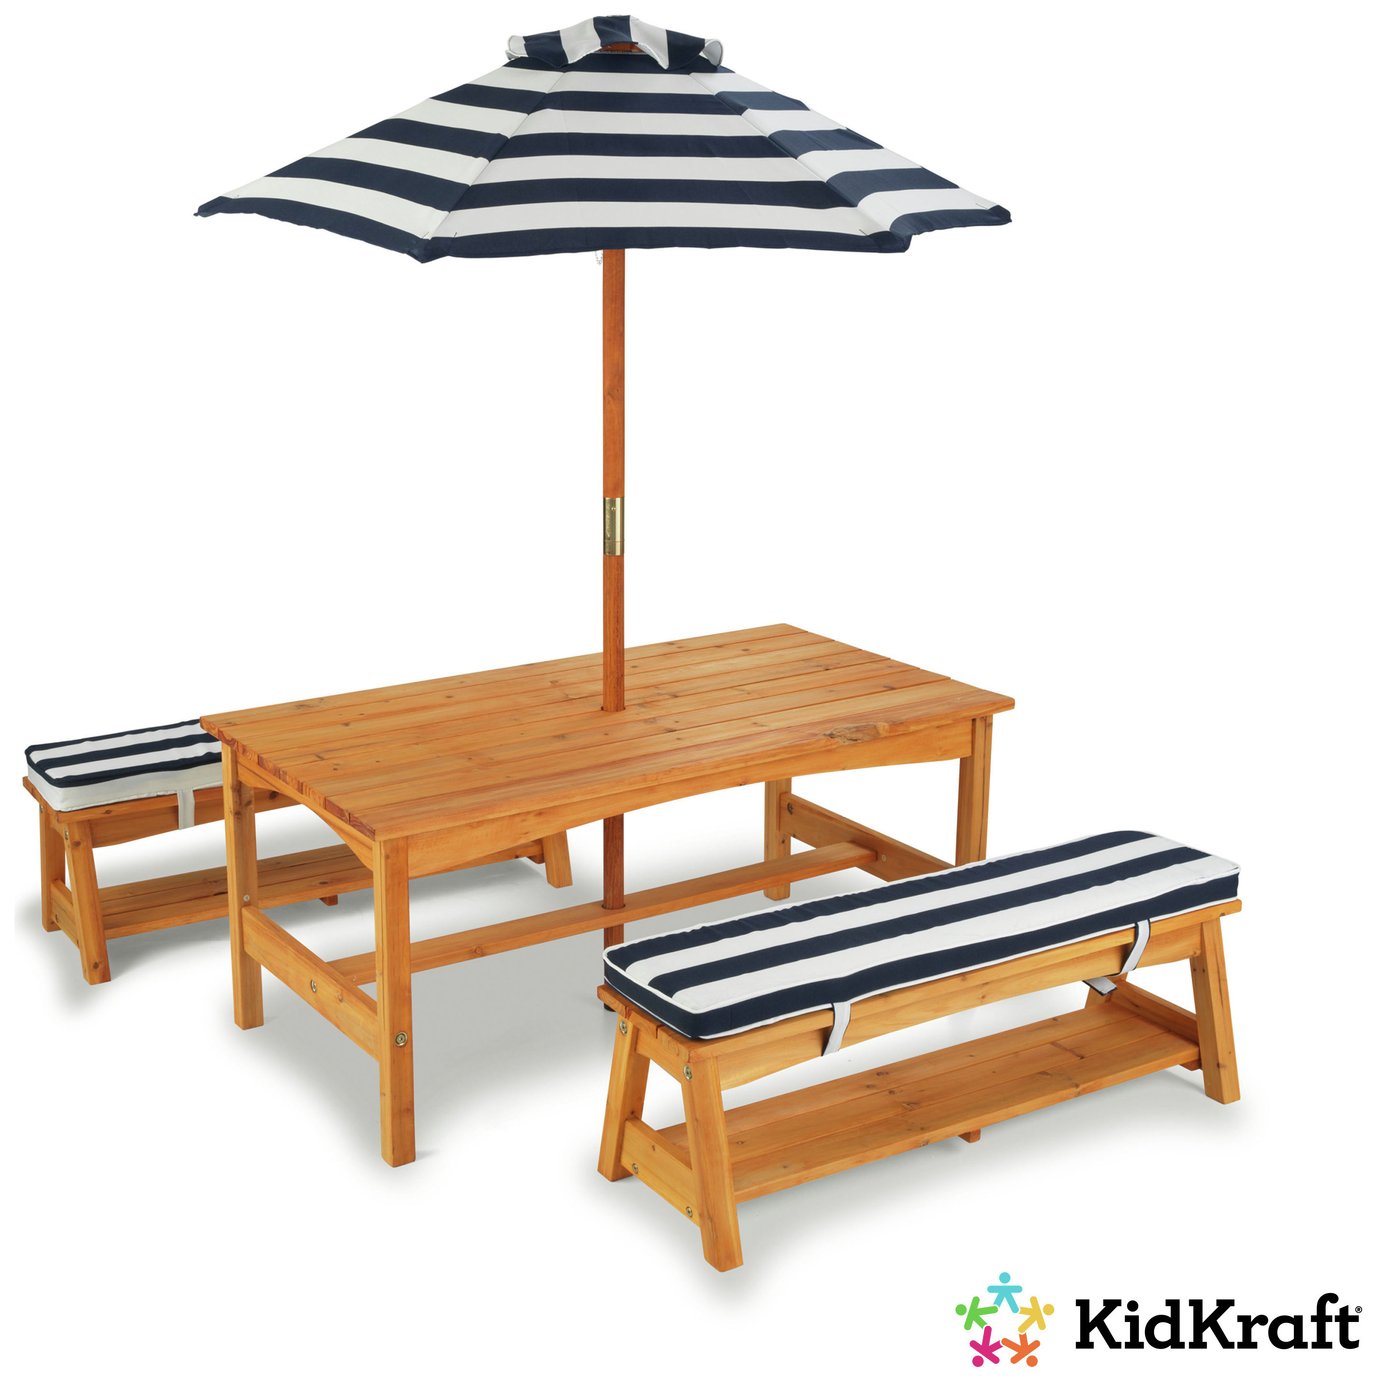 KidKraft Outdoor Table And Bench Set - Navy And White